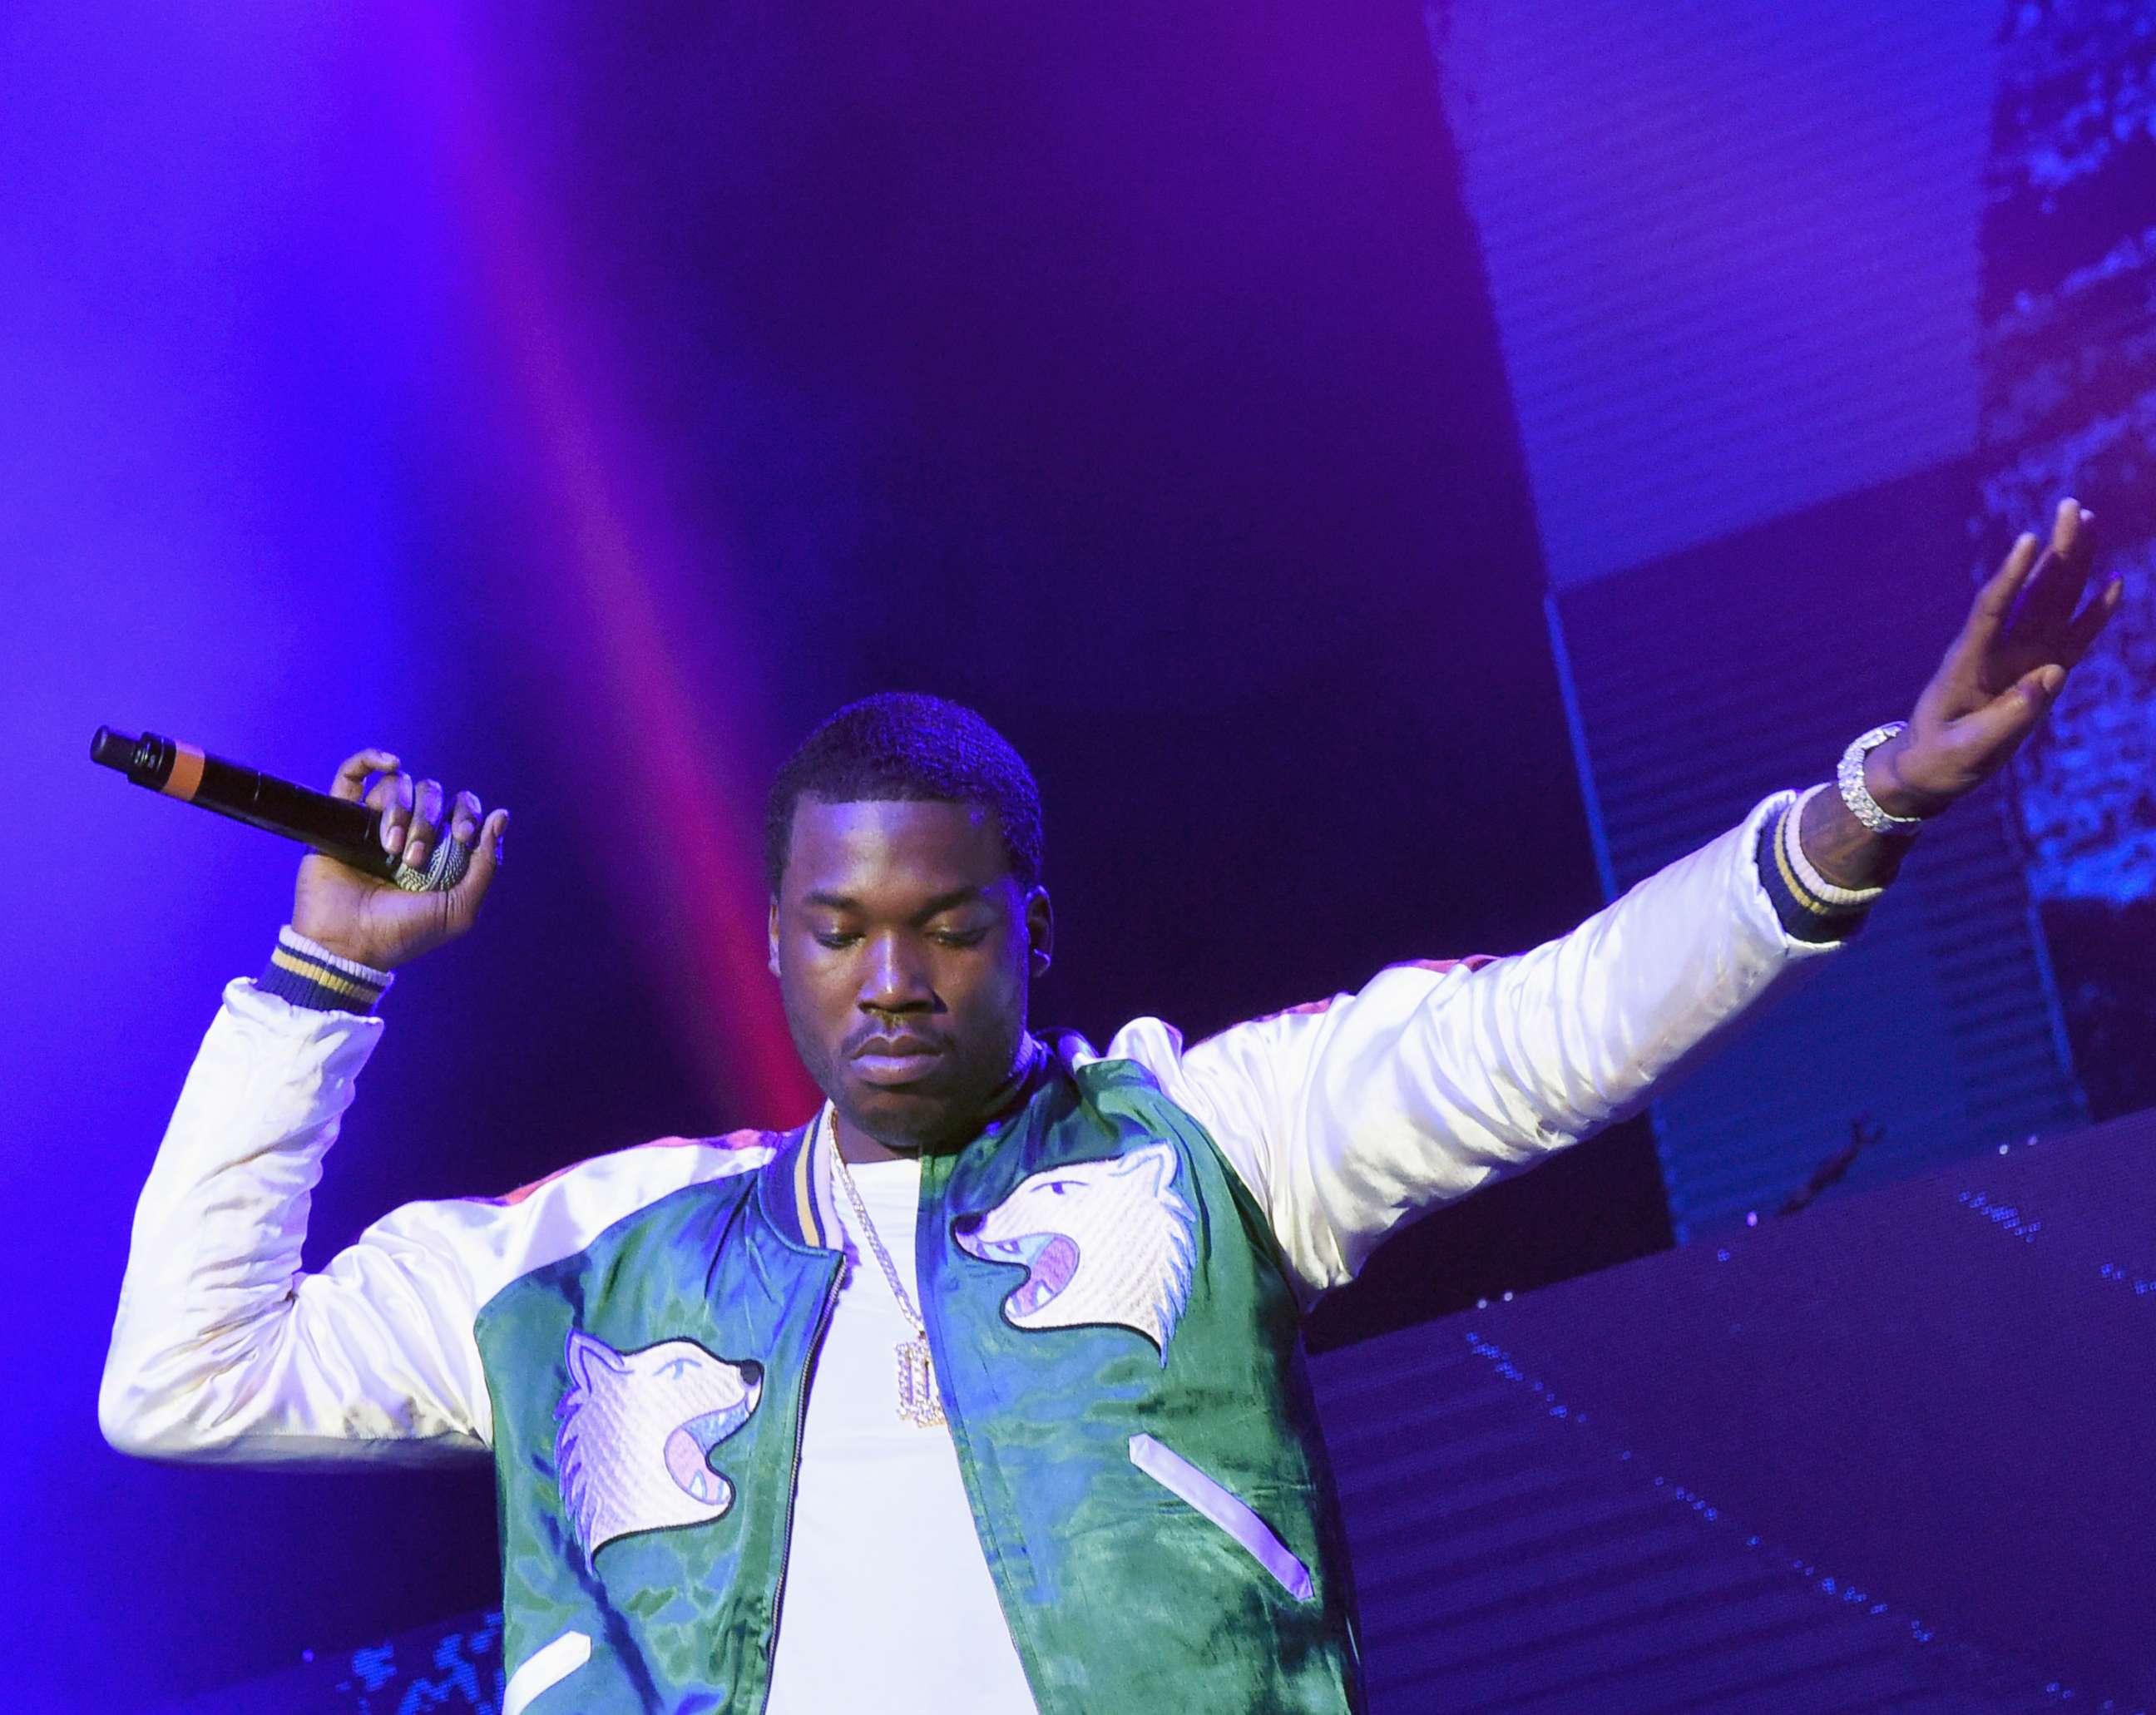 PHOTO: Meek Mill performs during V-103 Live Pop Up Concert at Philips Arena, March 25, 2017, in Atlanta, in this file photo.